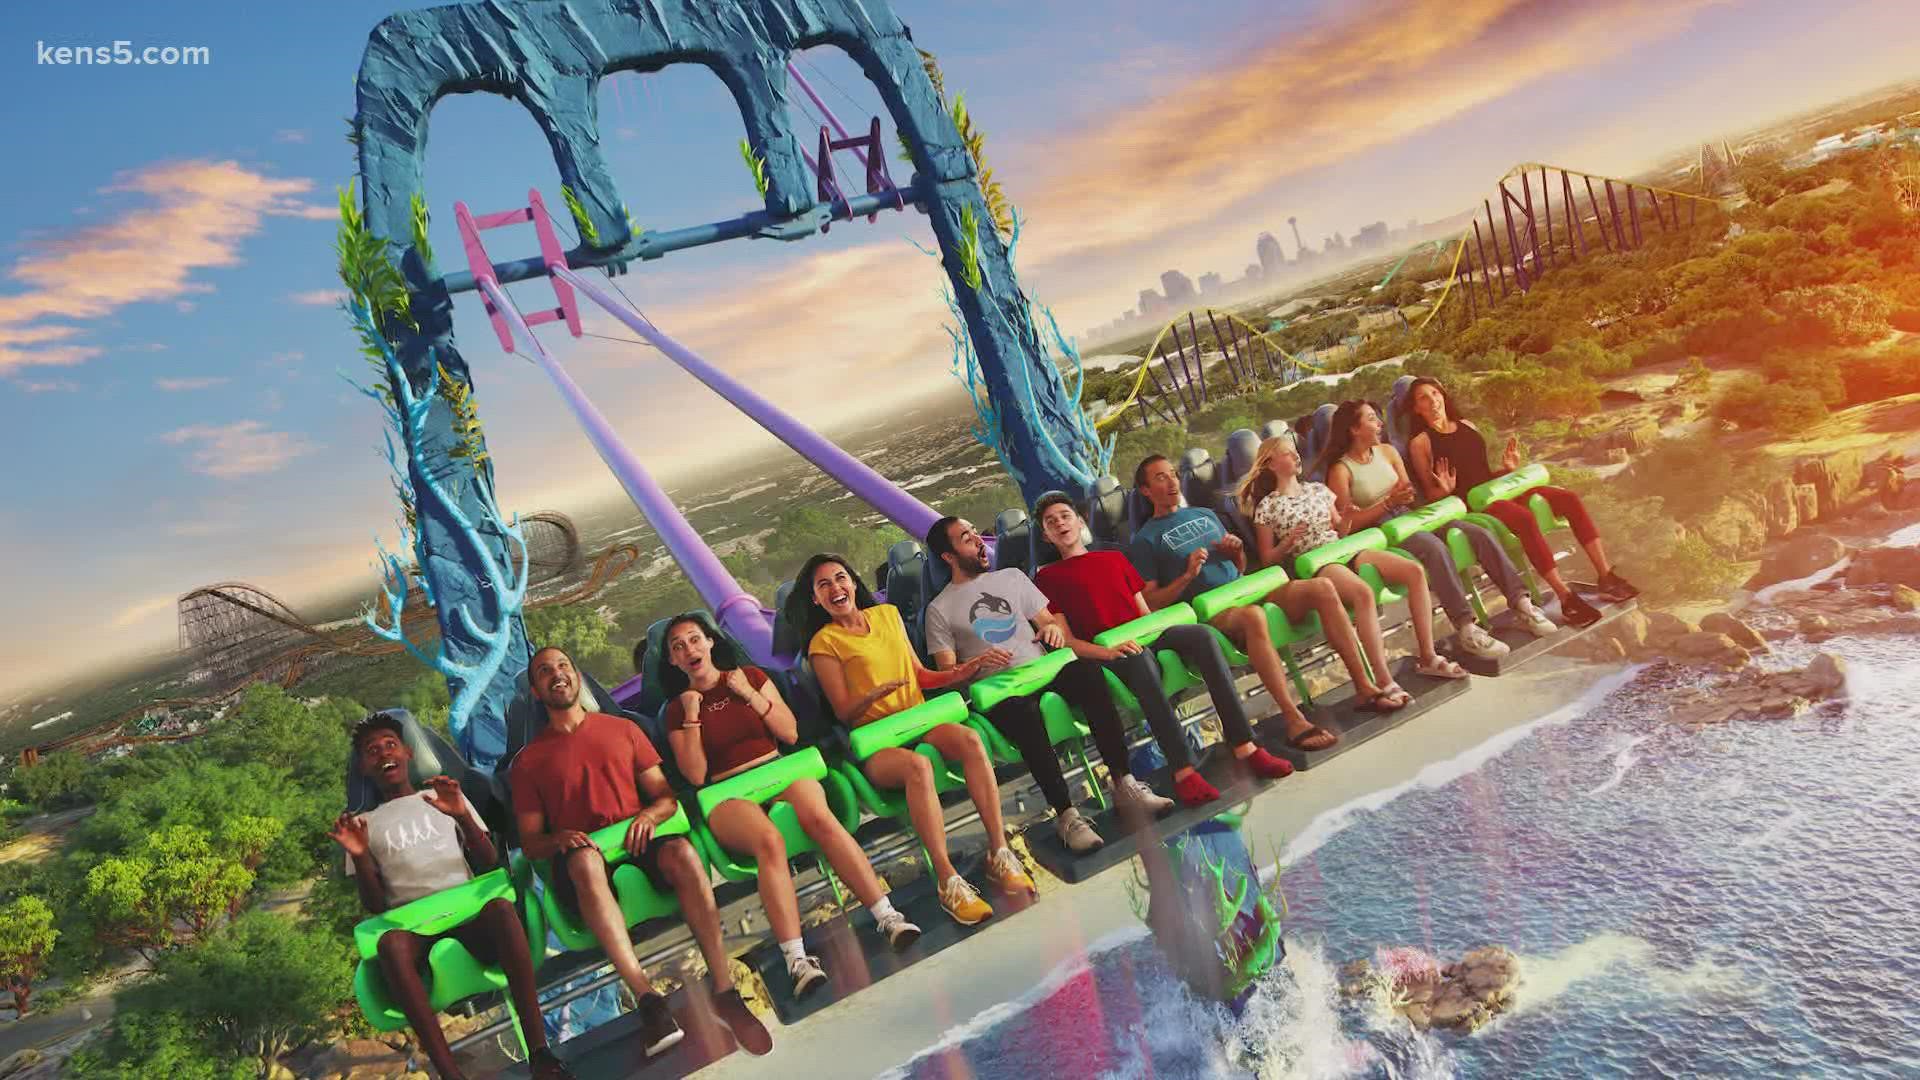 The new attraction, Tidal Surge, will seat 40 riders and feature two pendulum-like arms that will swing back and forth.